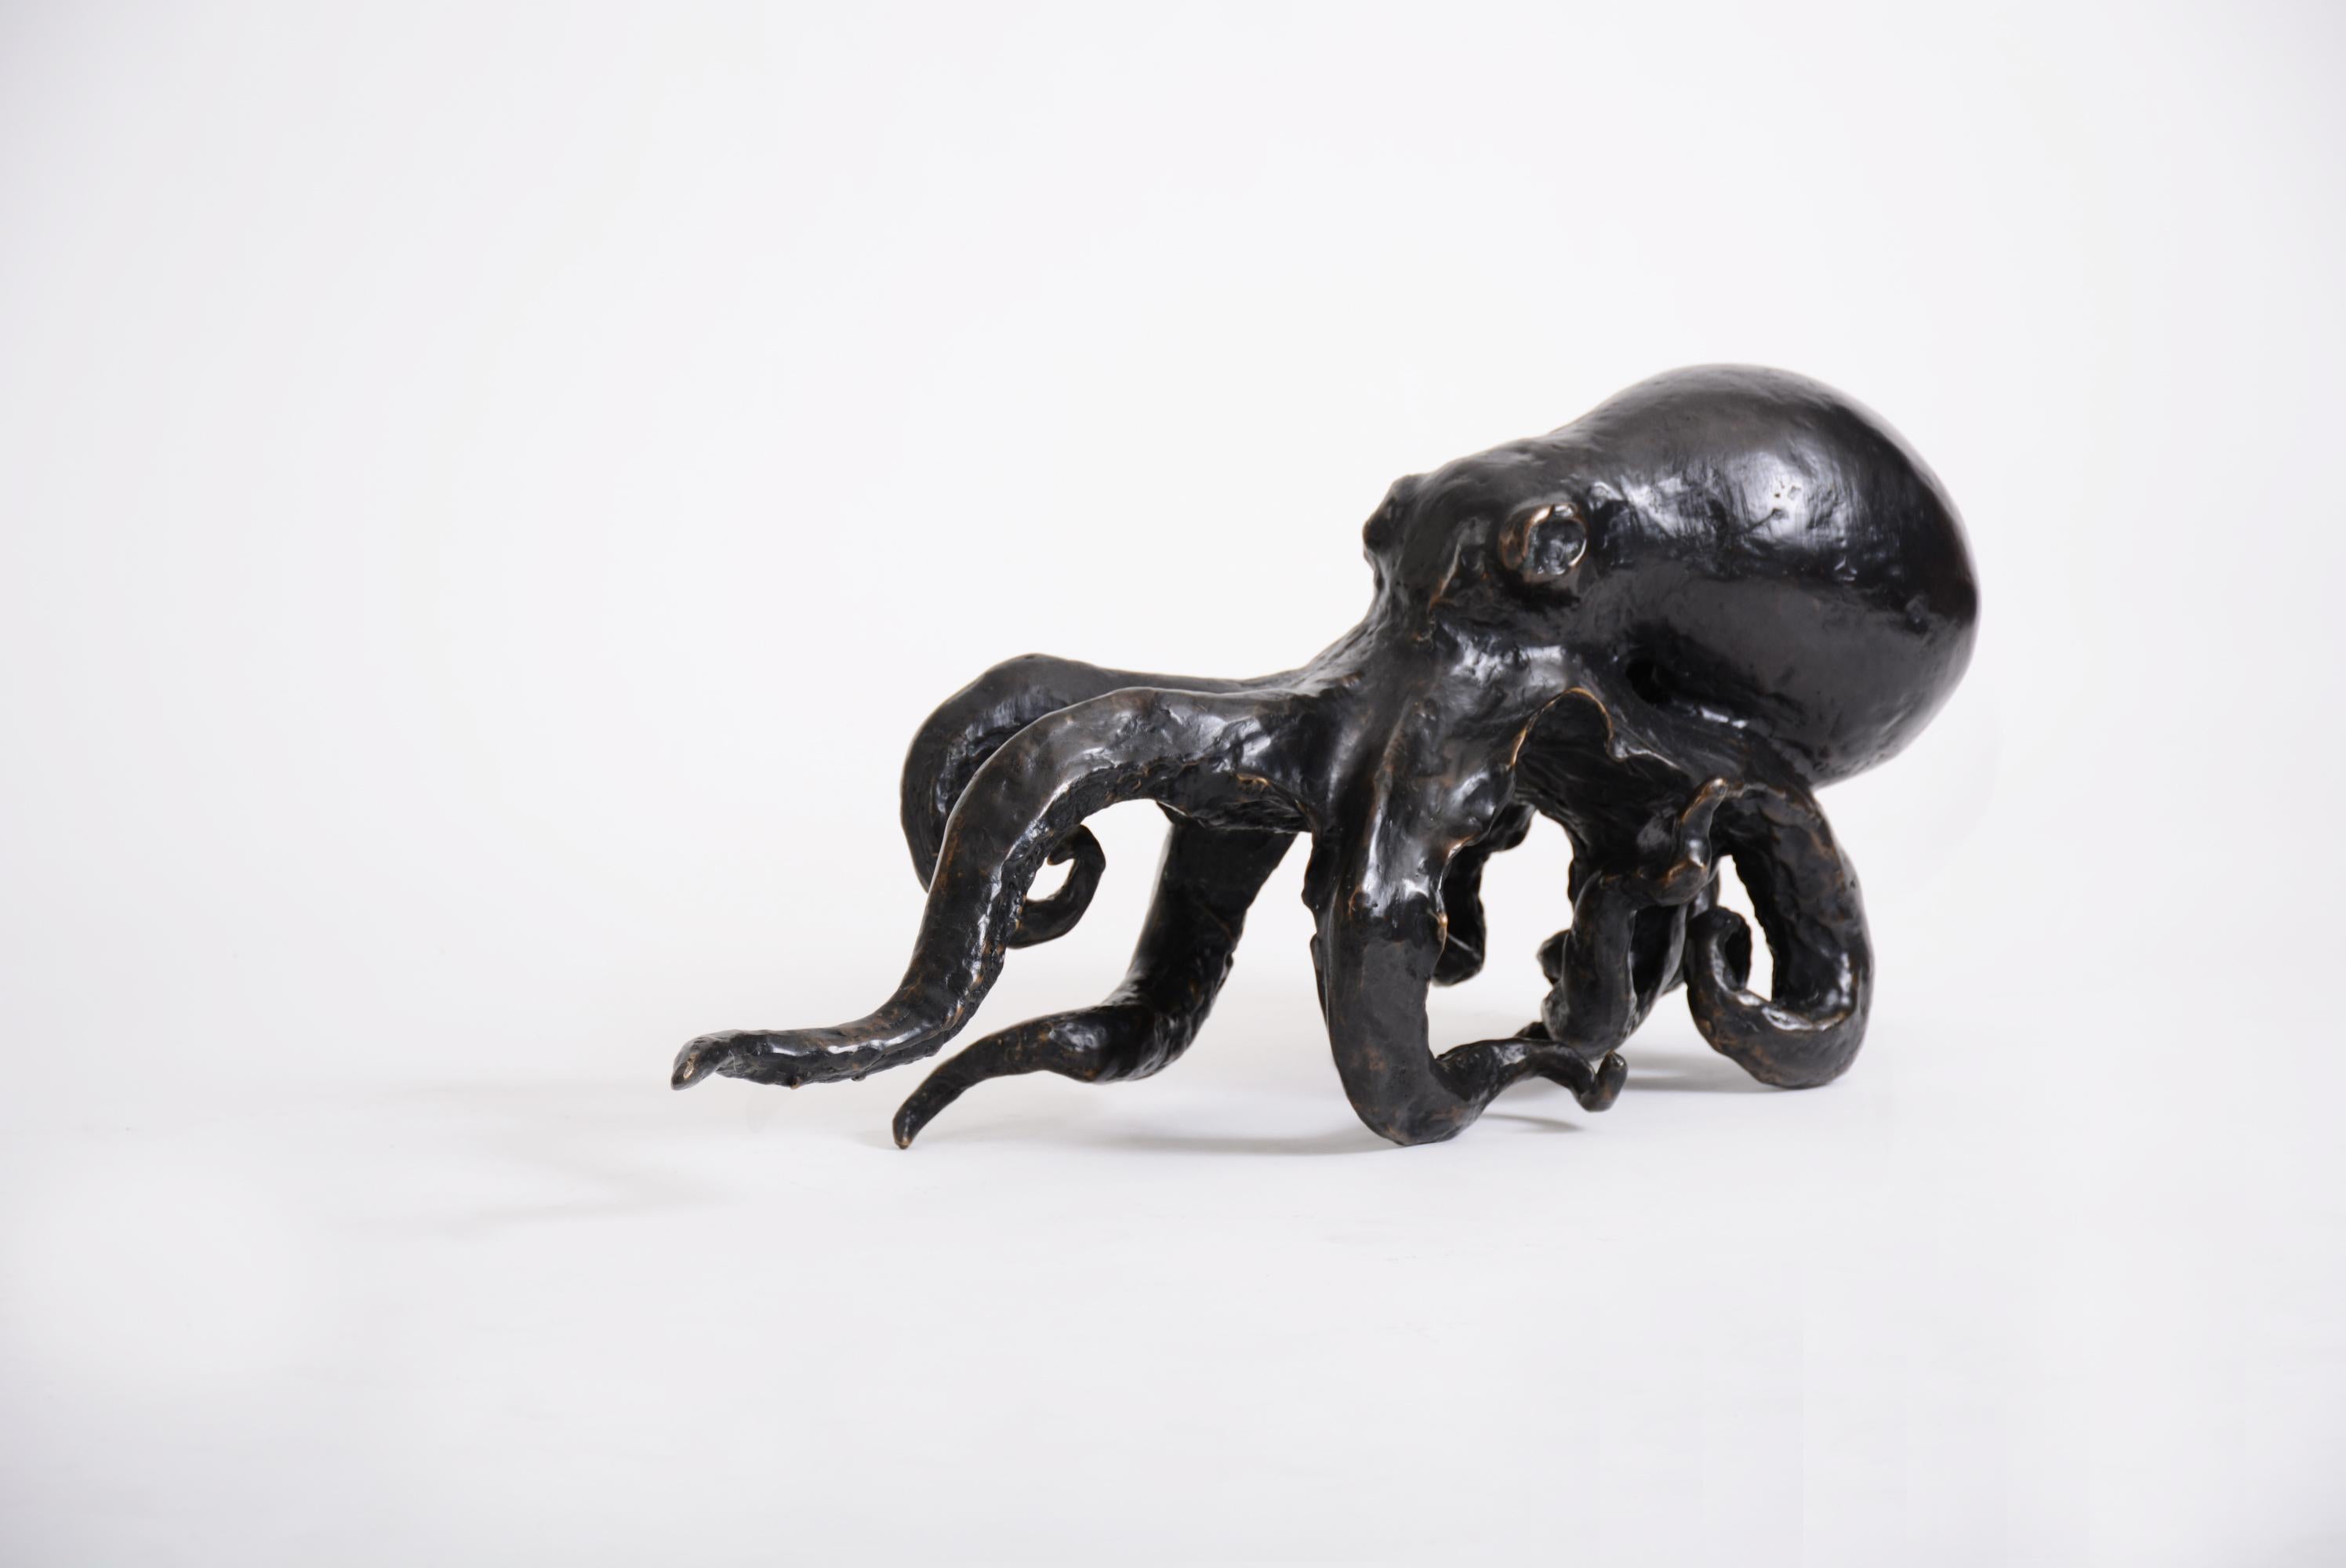 AVAILABLE NOW AND READY TO SHIP! 

Description/
Wild aquatic nature, unleashed indoors. This octopus is energetic, on the move, and mysterious.

Dimensions/
W 25.6 x D 7.9 x H 11 in
W 65 x D 20 x H 28 cm.